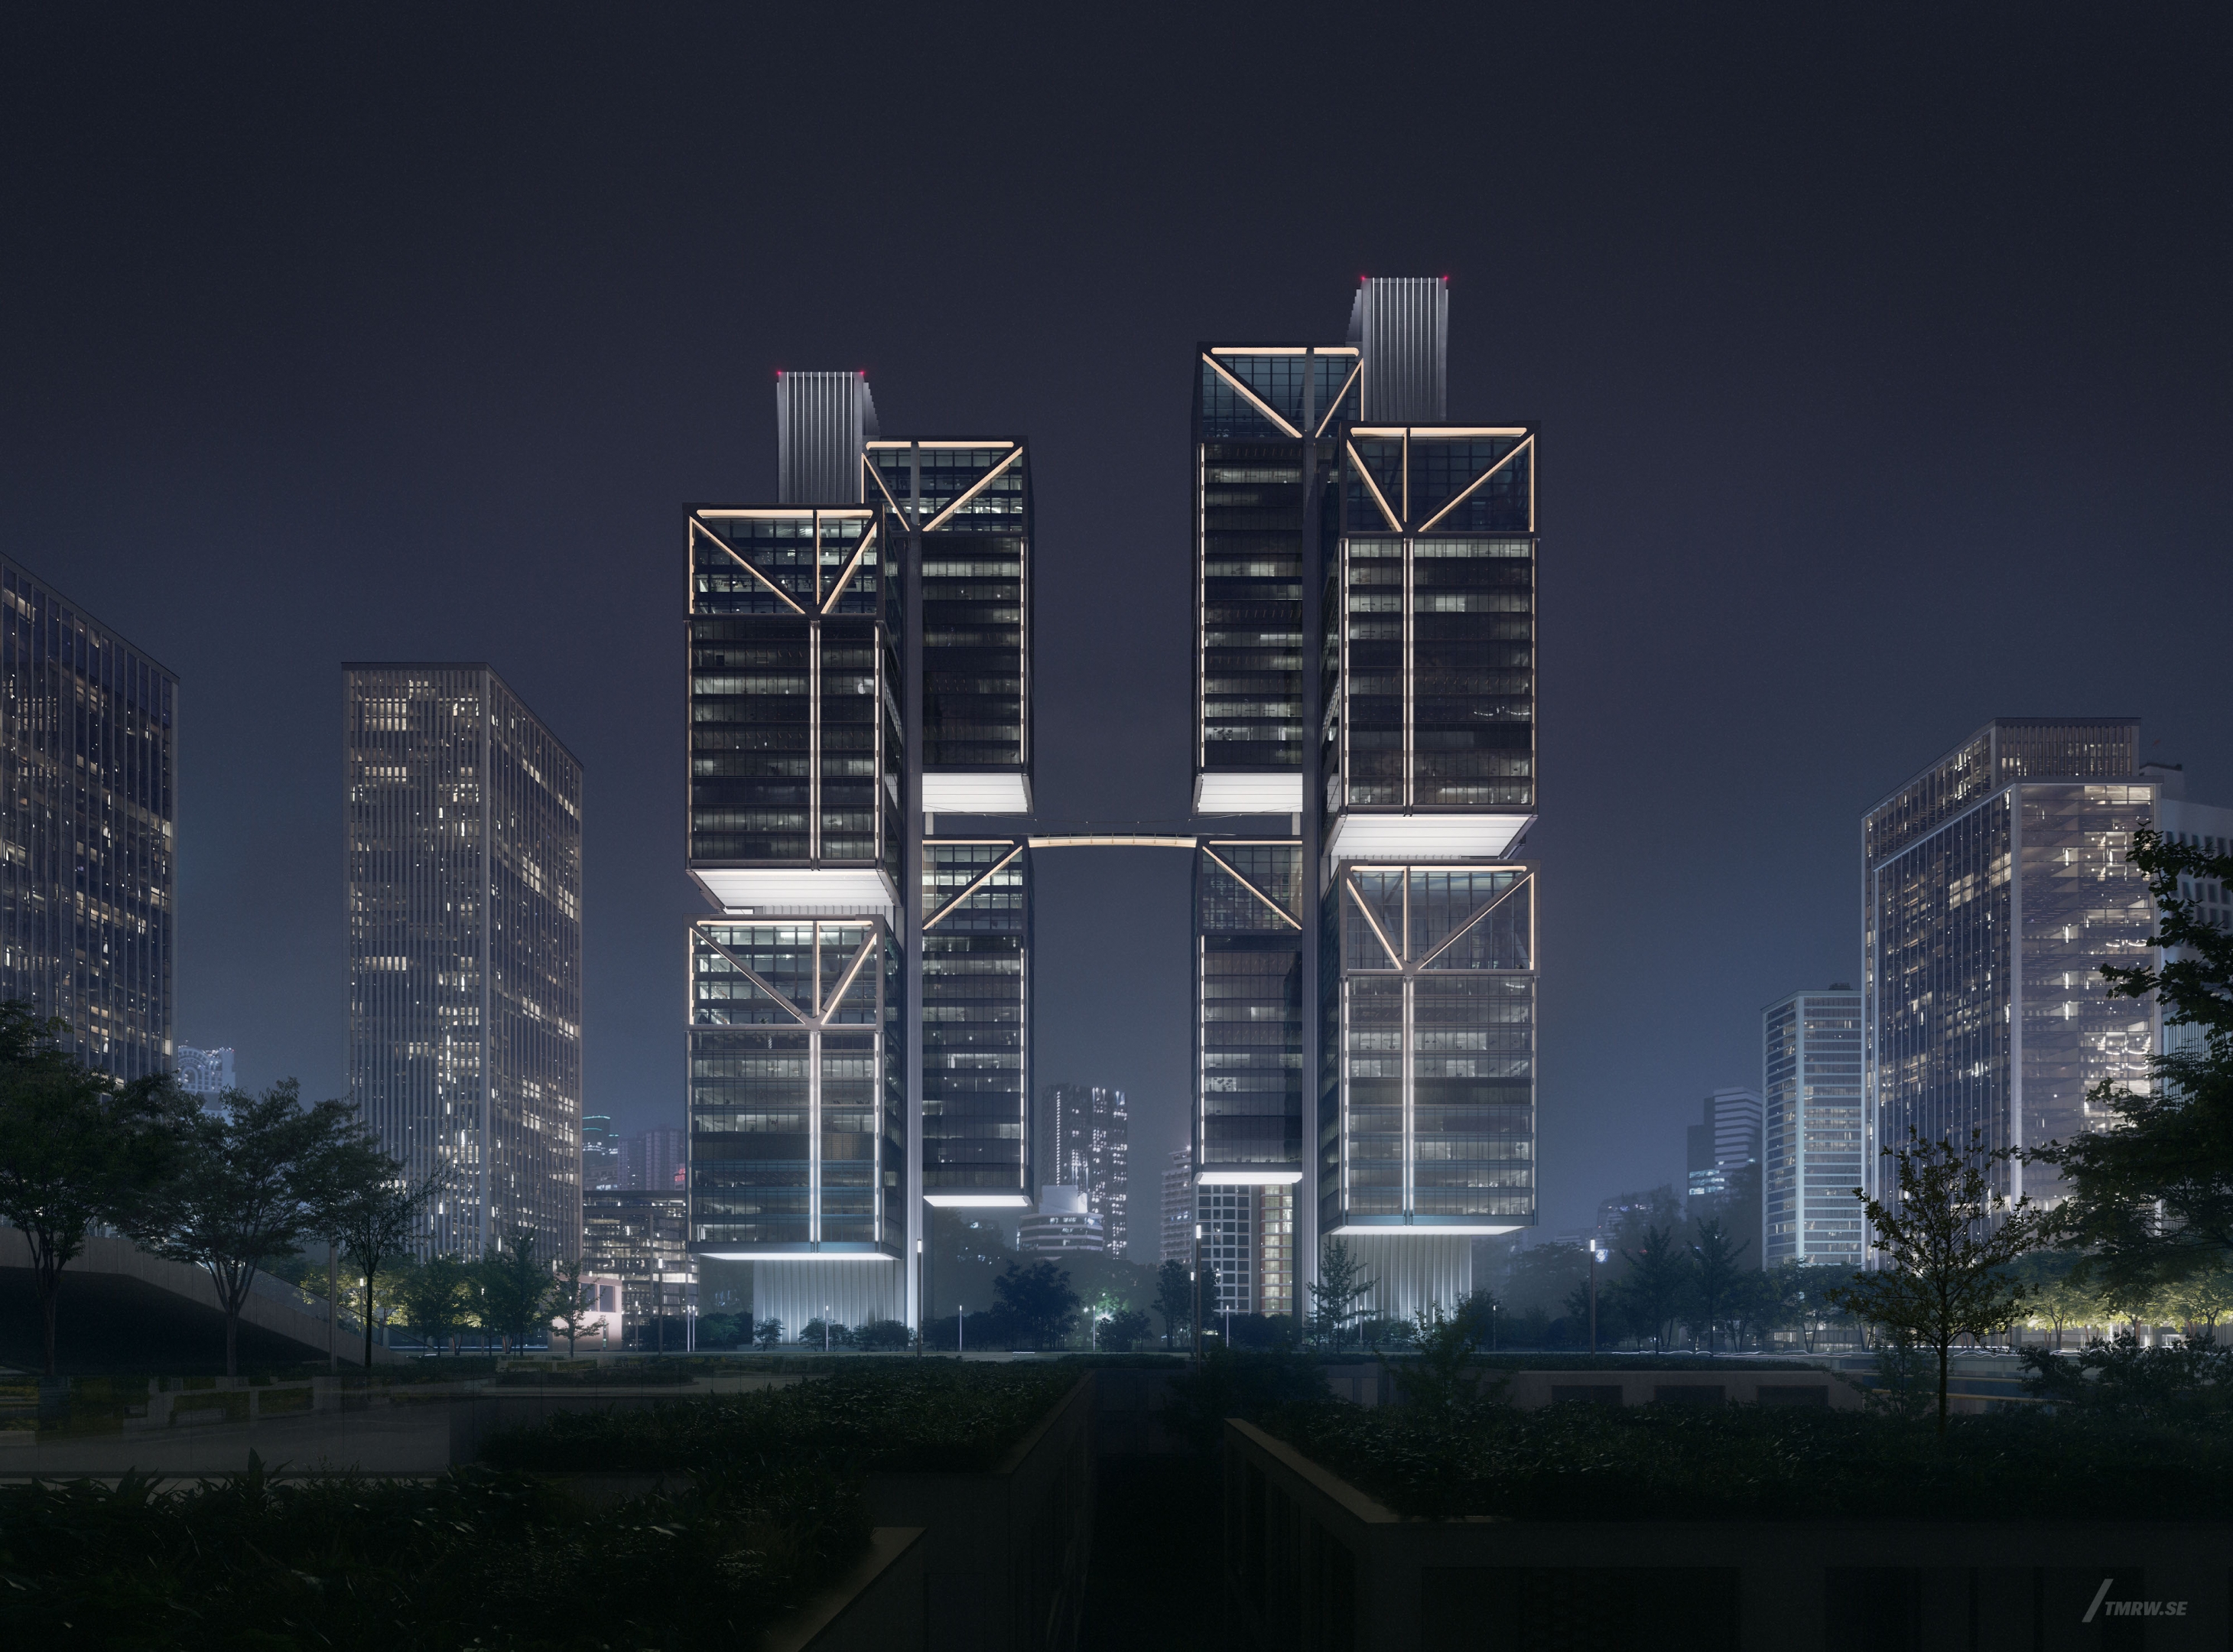 Architectural visualization of DJI for Foster + Partners. A image of the exterior of a two skyscaper office buildings infornt at night from ground view.